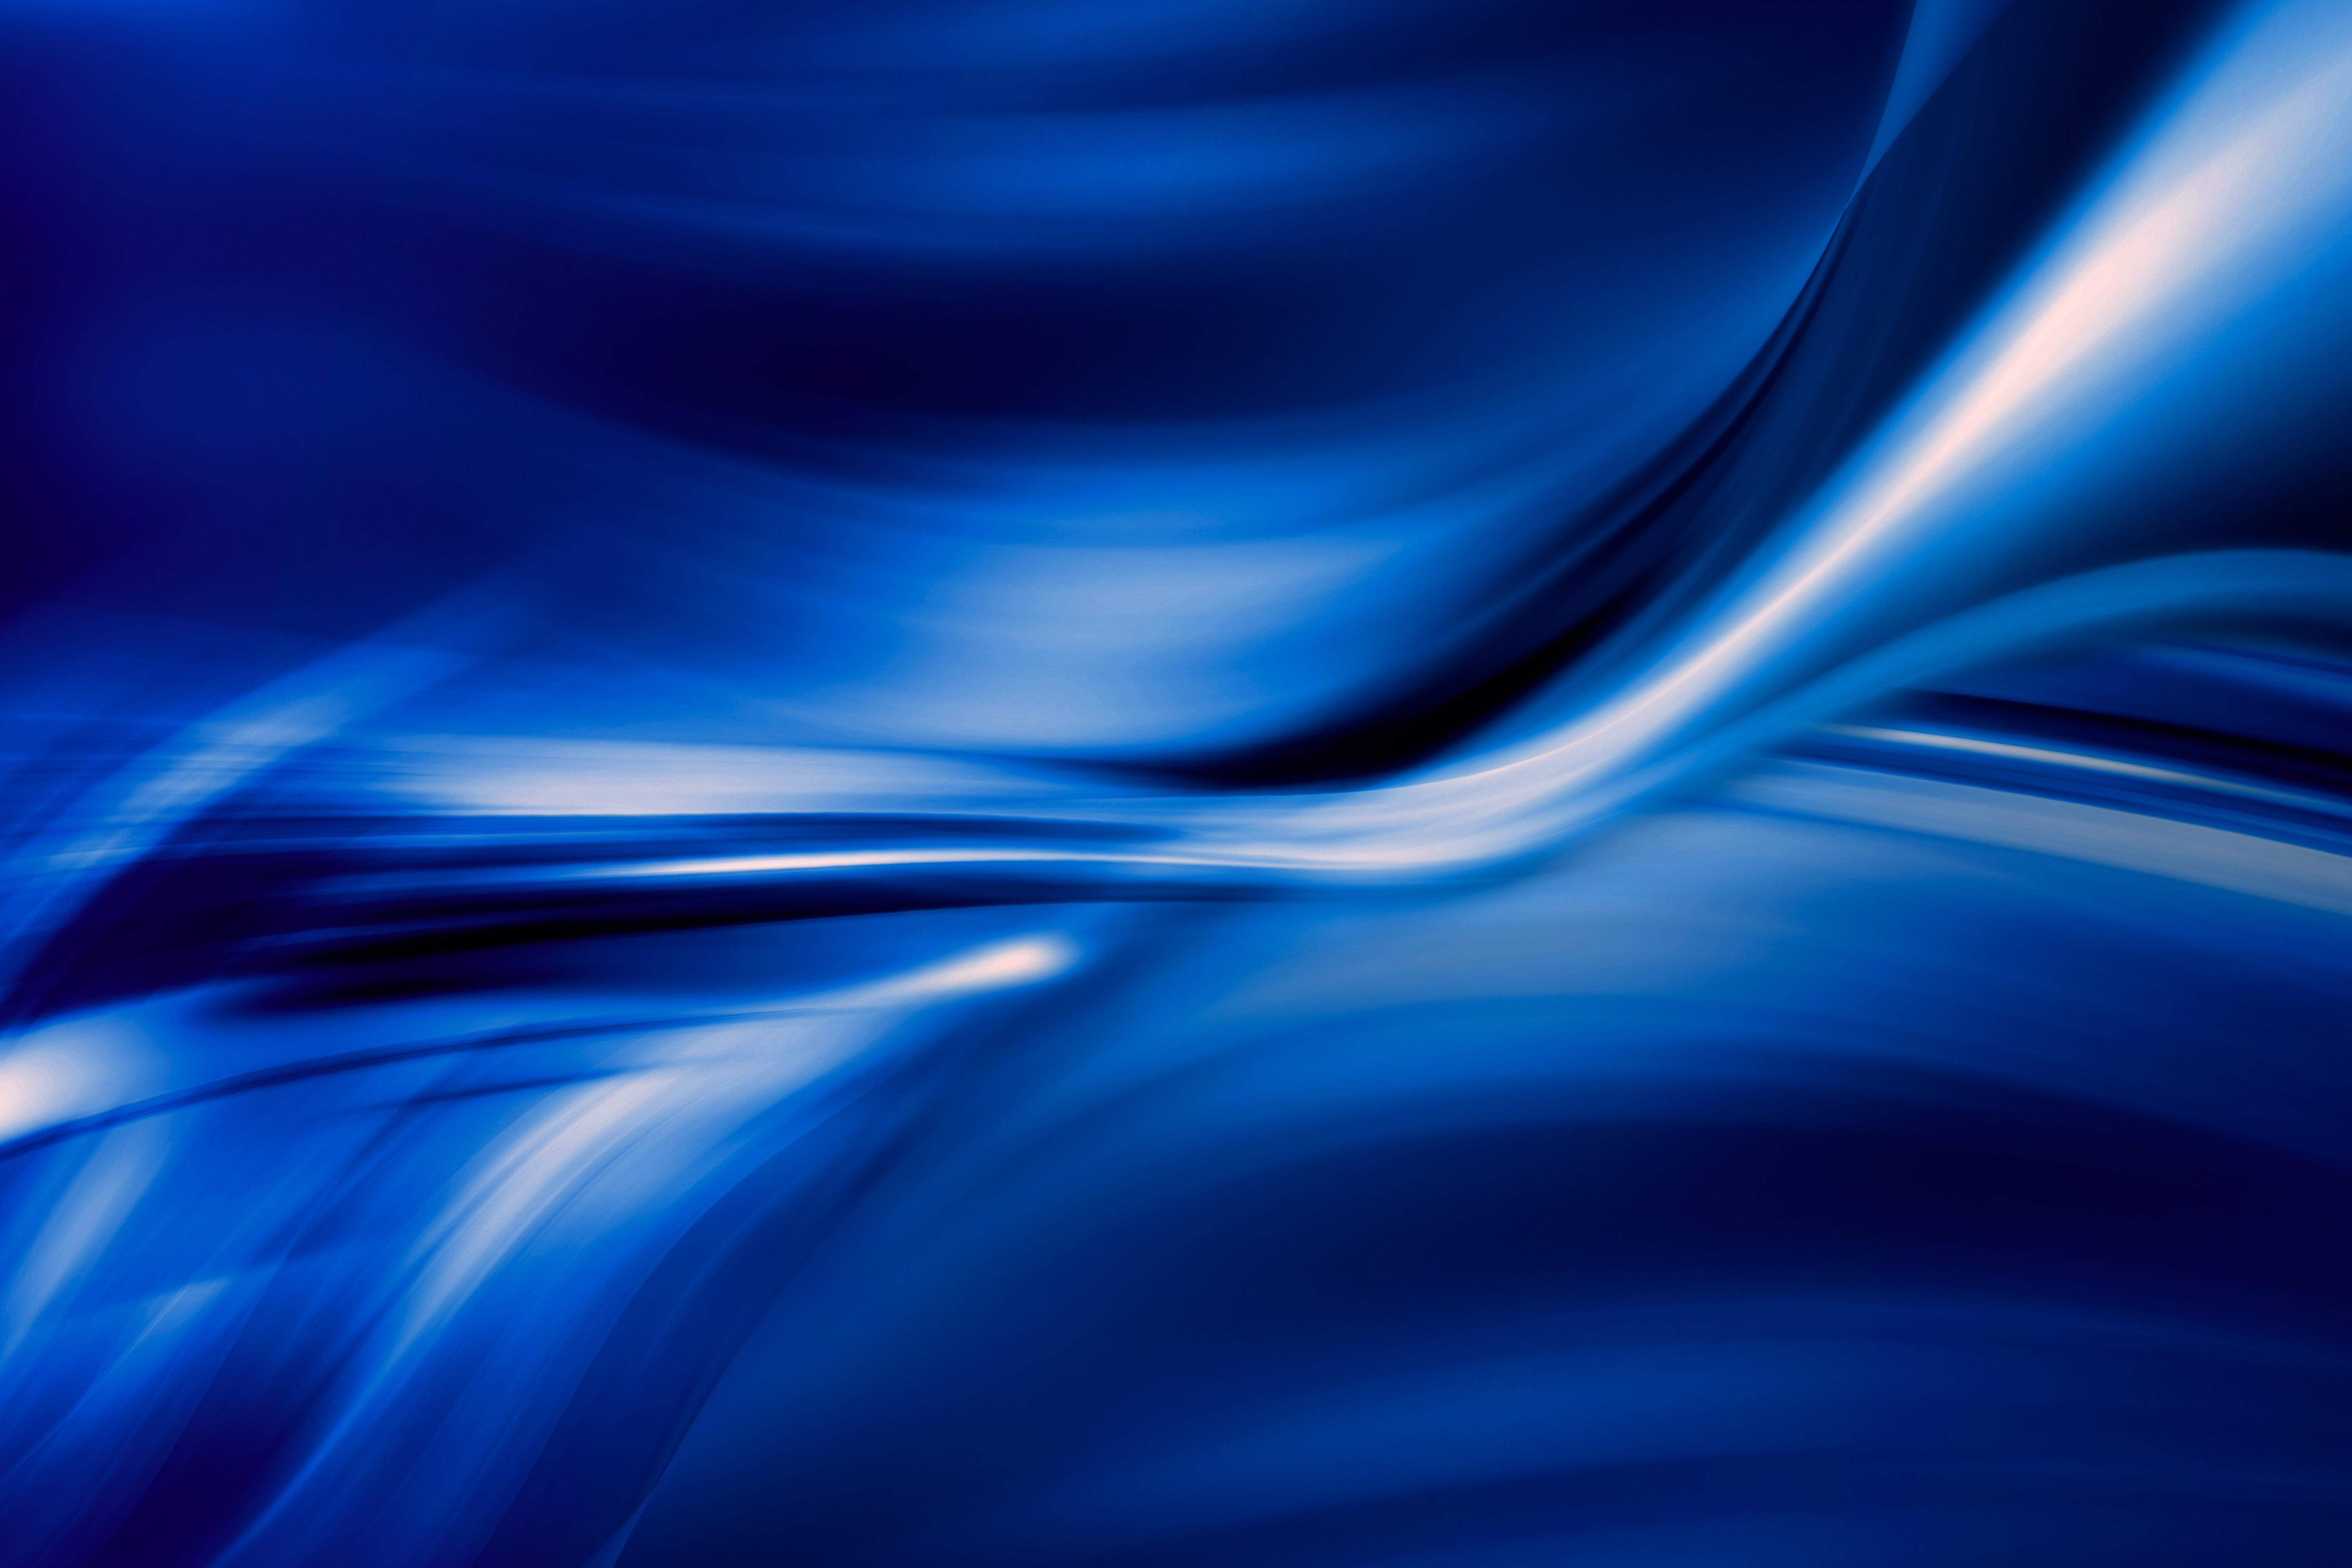 Light and dark abstract blue background